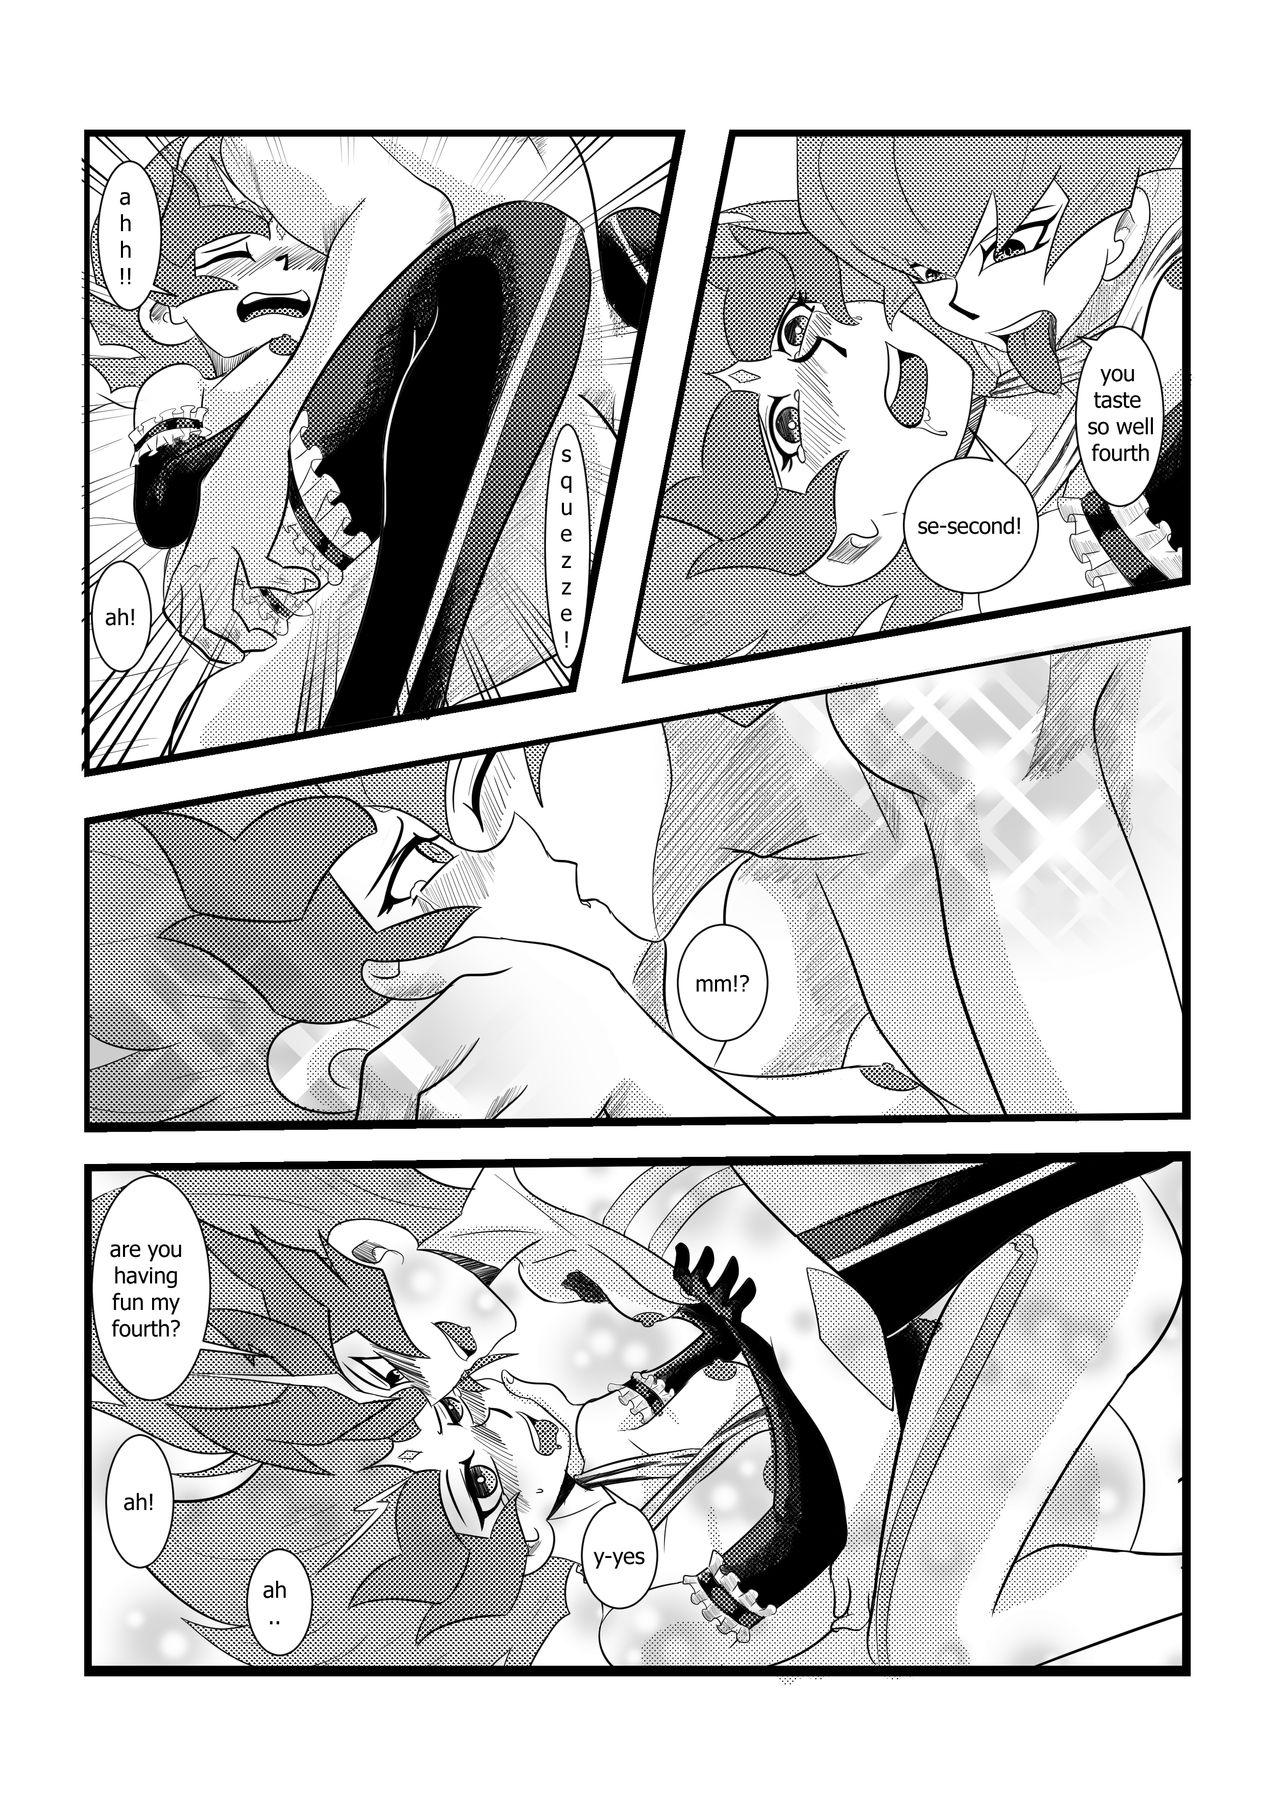 Chile For Her - Yu-gi-oh zexal Stepfamily - Page 19